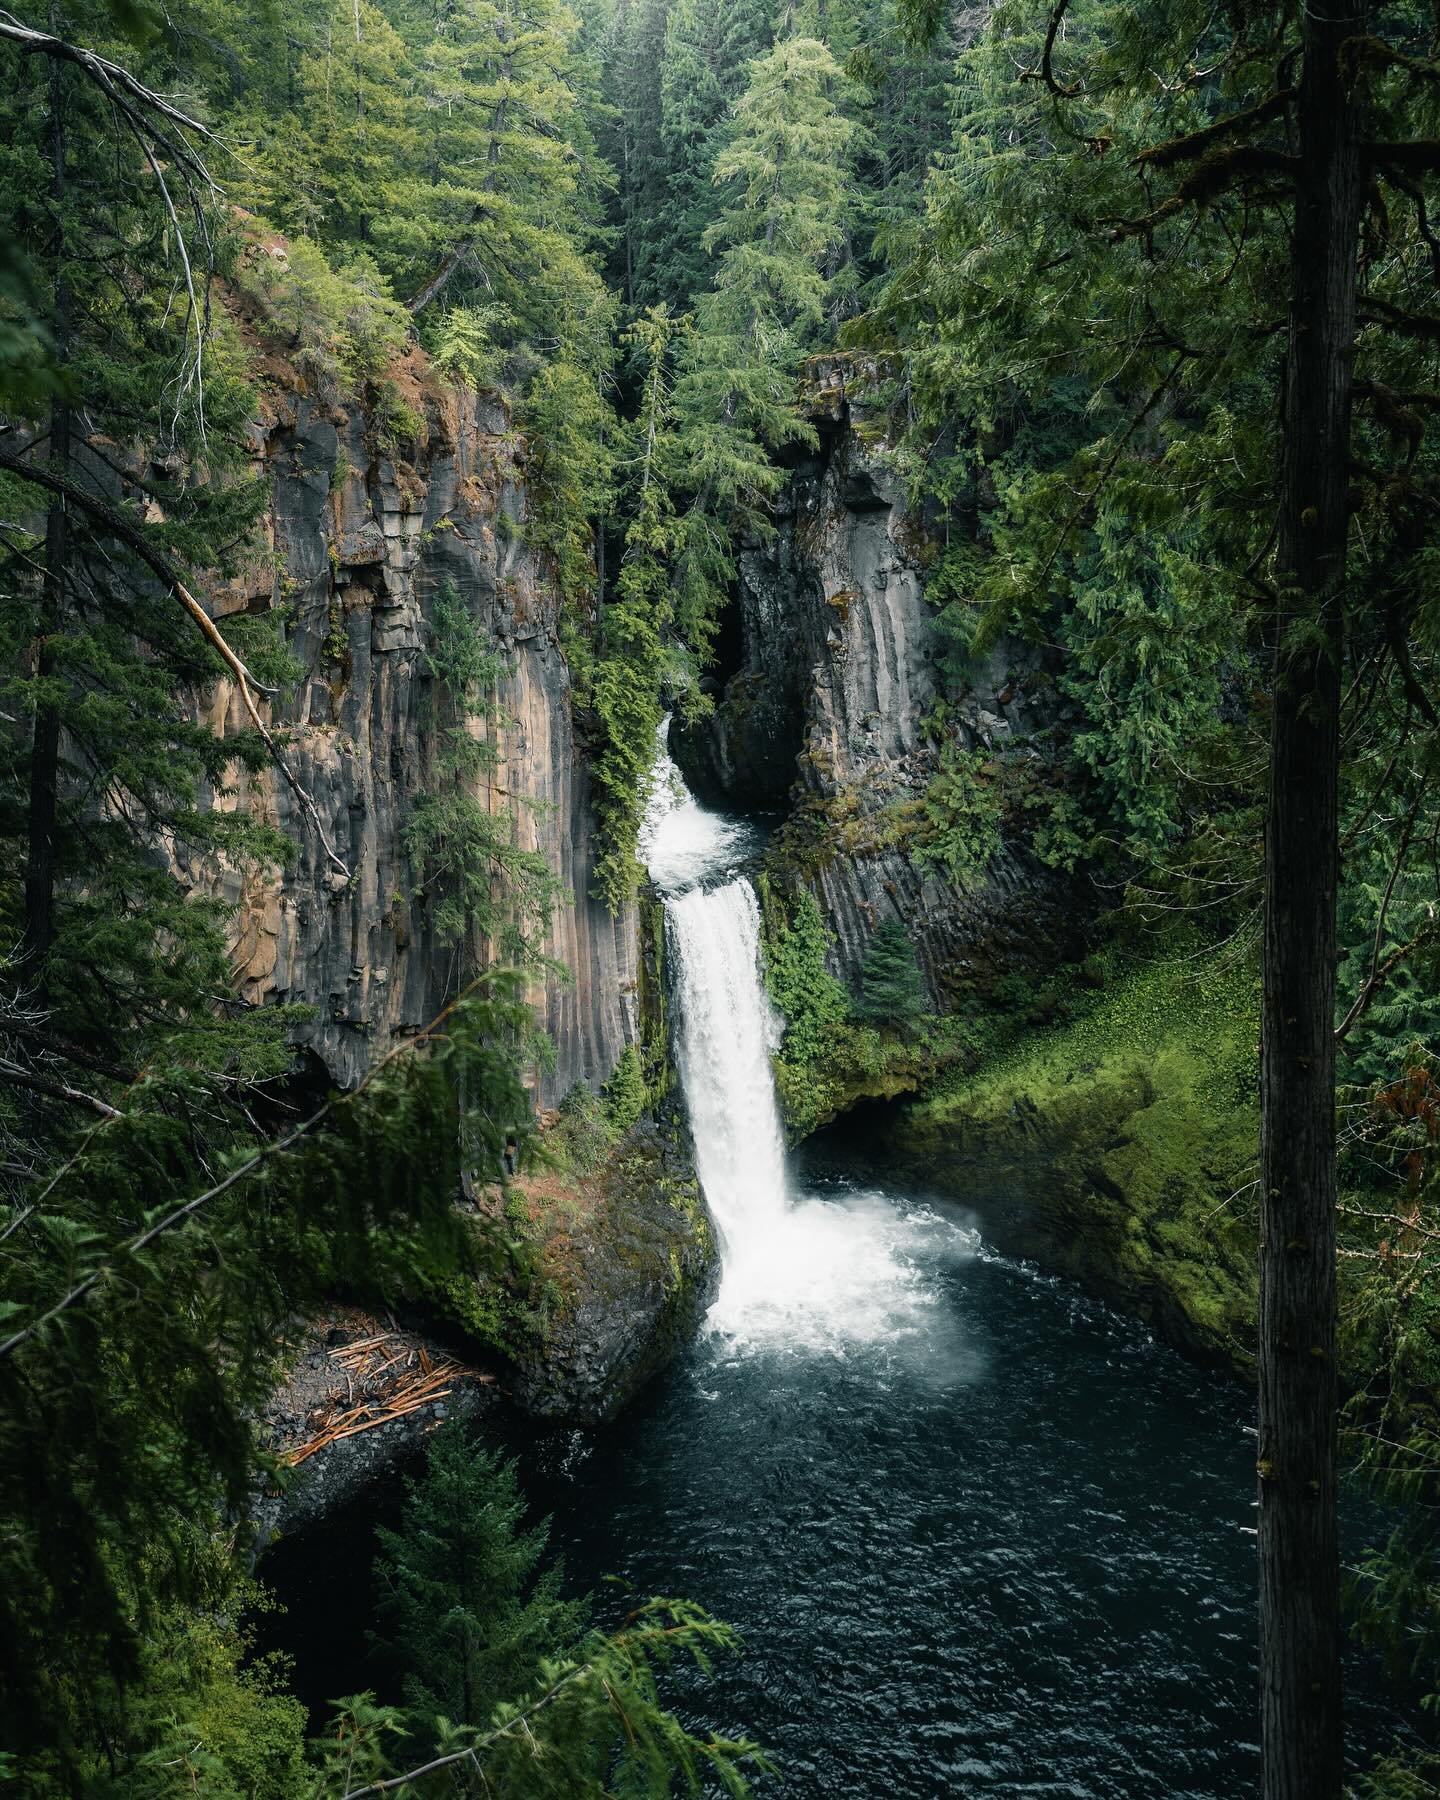 There&rsquo;s something wild about Oregon&rsquo;s waterfalls. Tucked away in dark forests, they always exude a mysterious aura, especially on hazy days. This one was my favorite, with its volcanic basalt rock face and the beautiful trees surrounding 